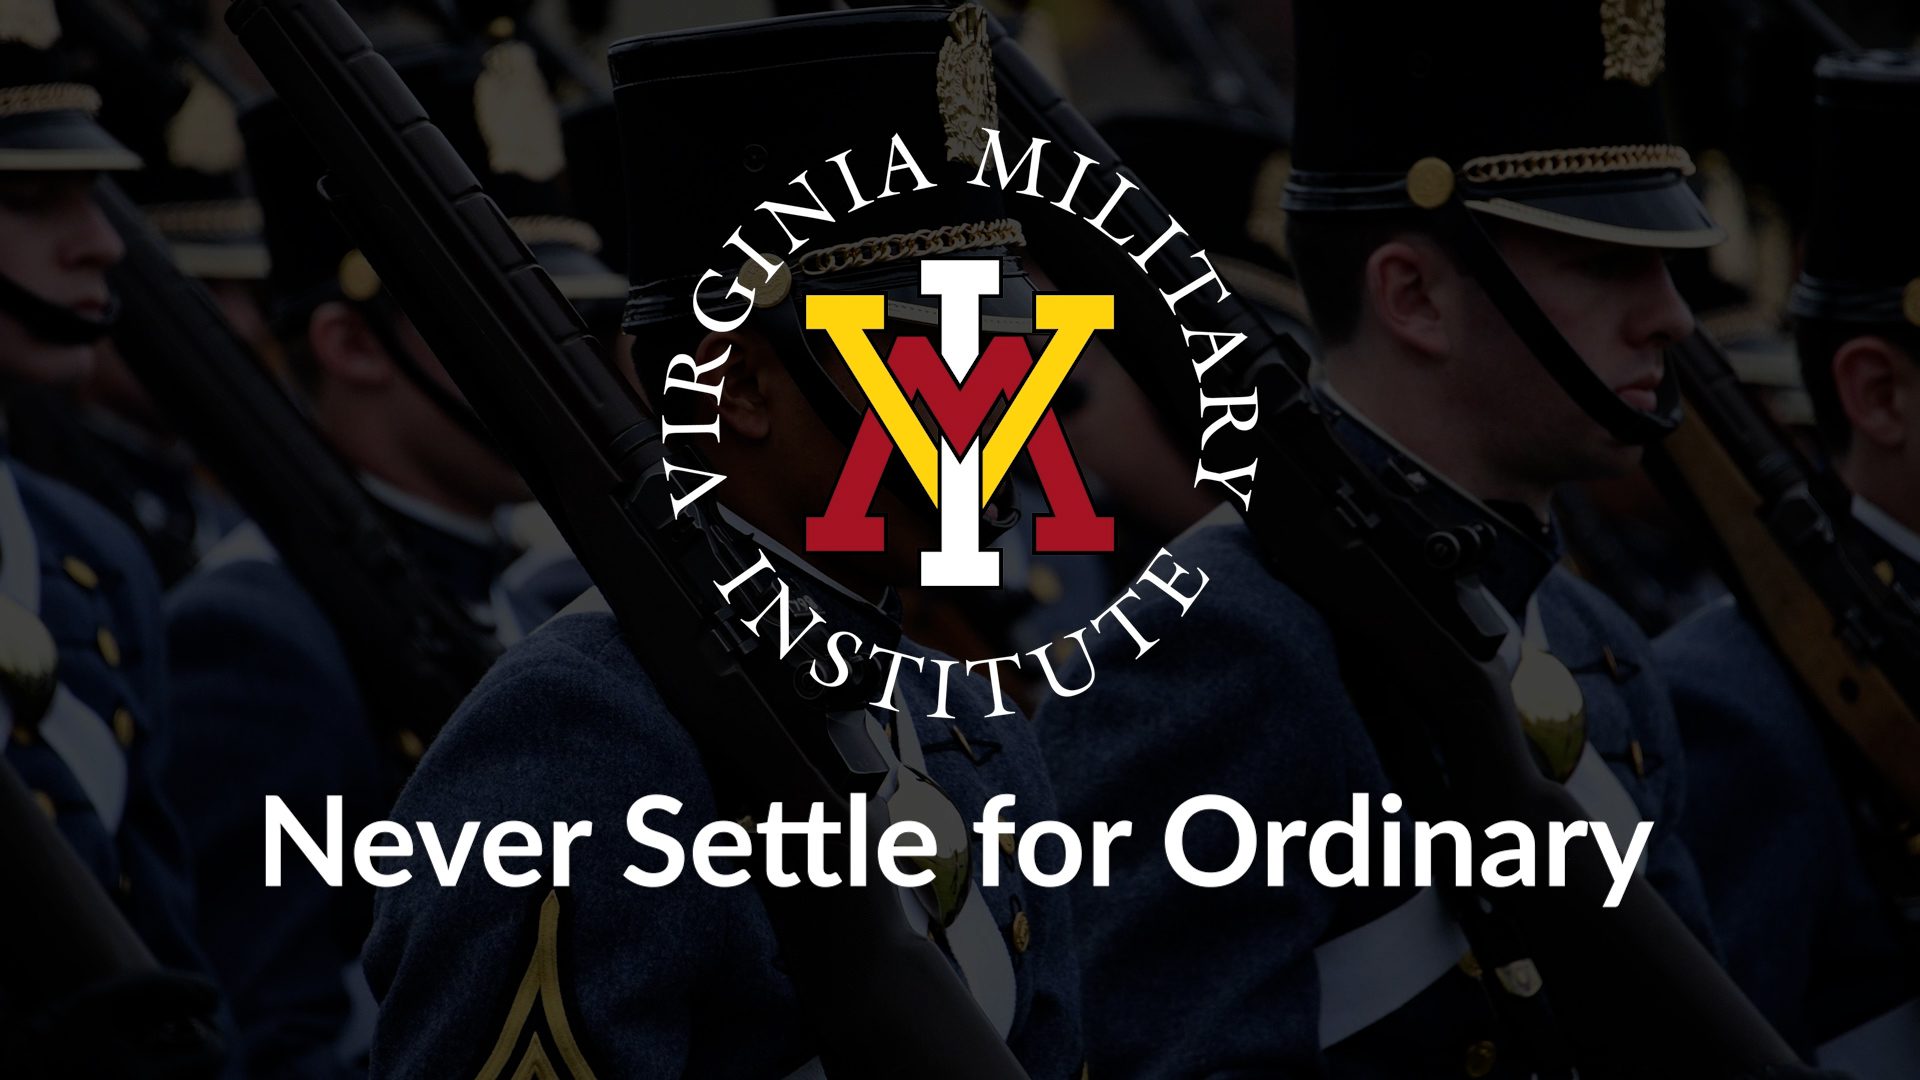 VMI logo with text Never Settle for Ordinary